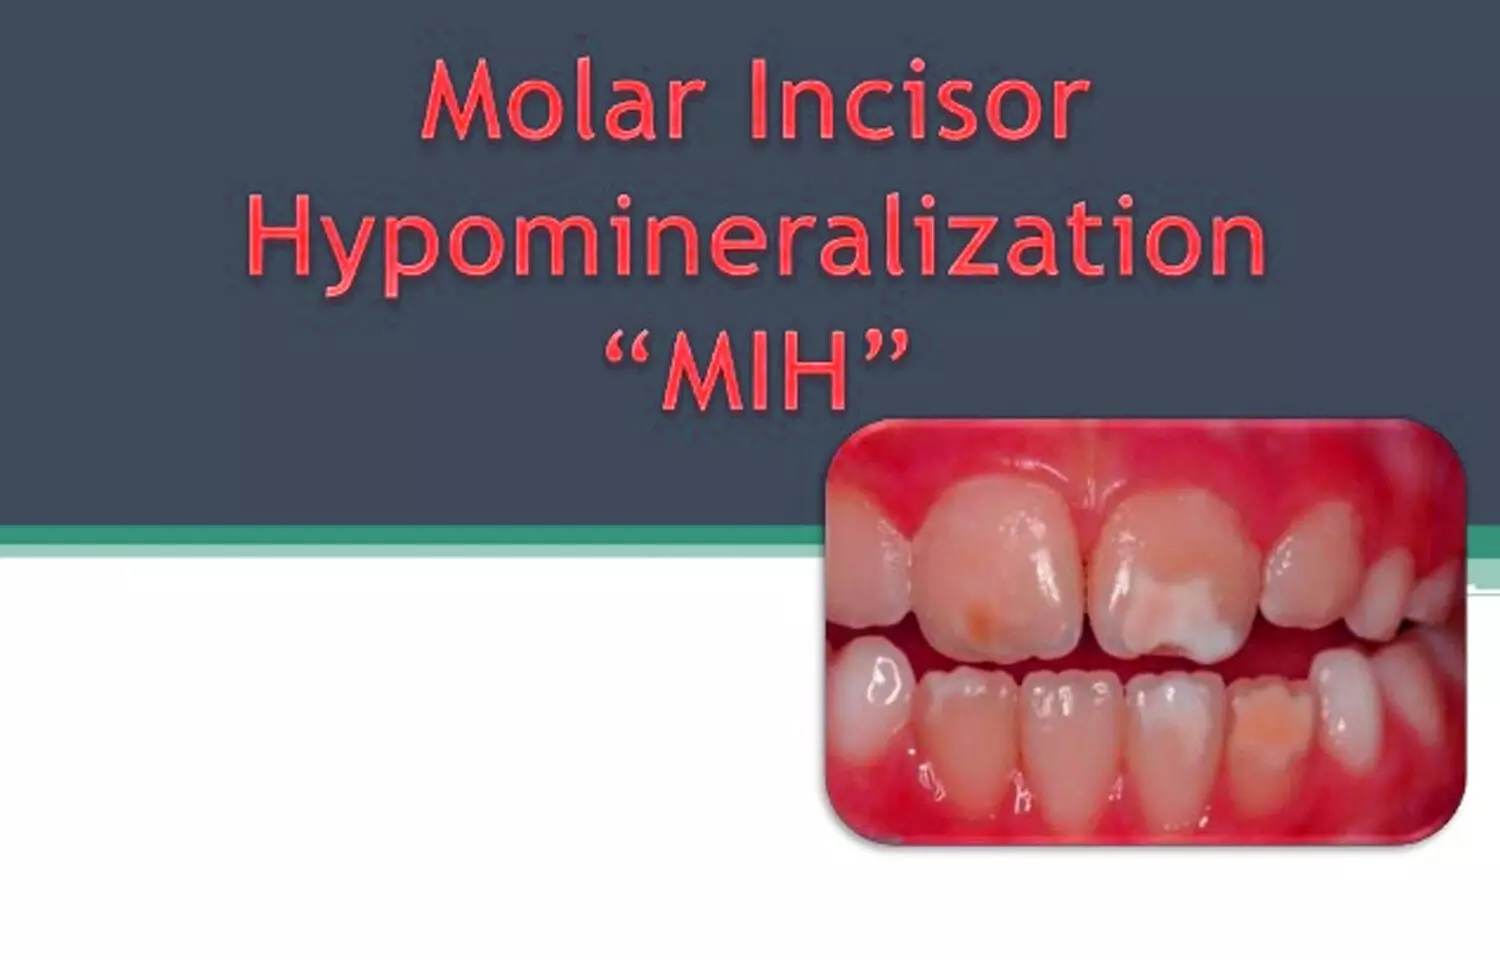 Management of MIH to prevent early posteruptive enamel breakdown- A case report